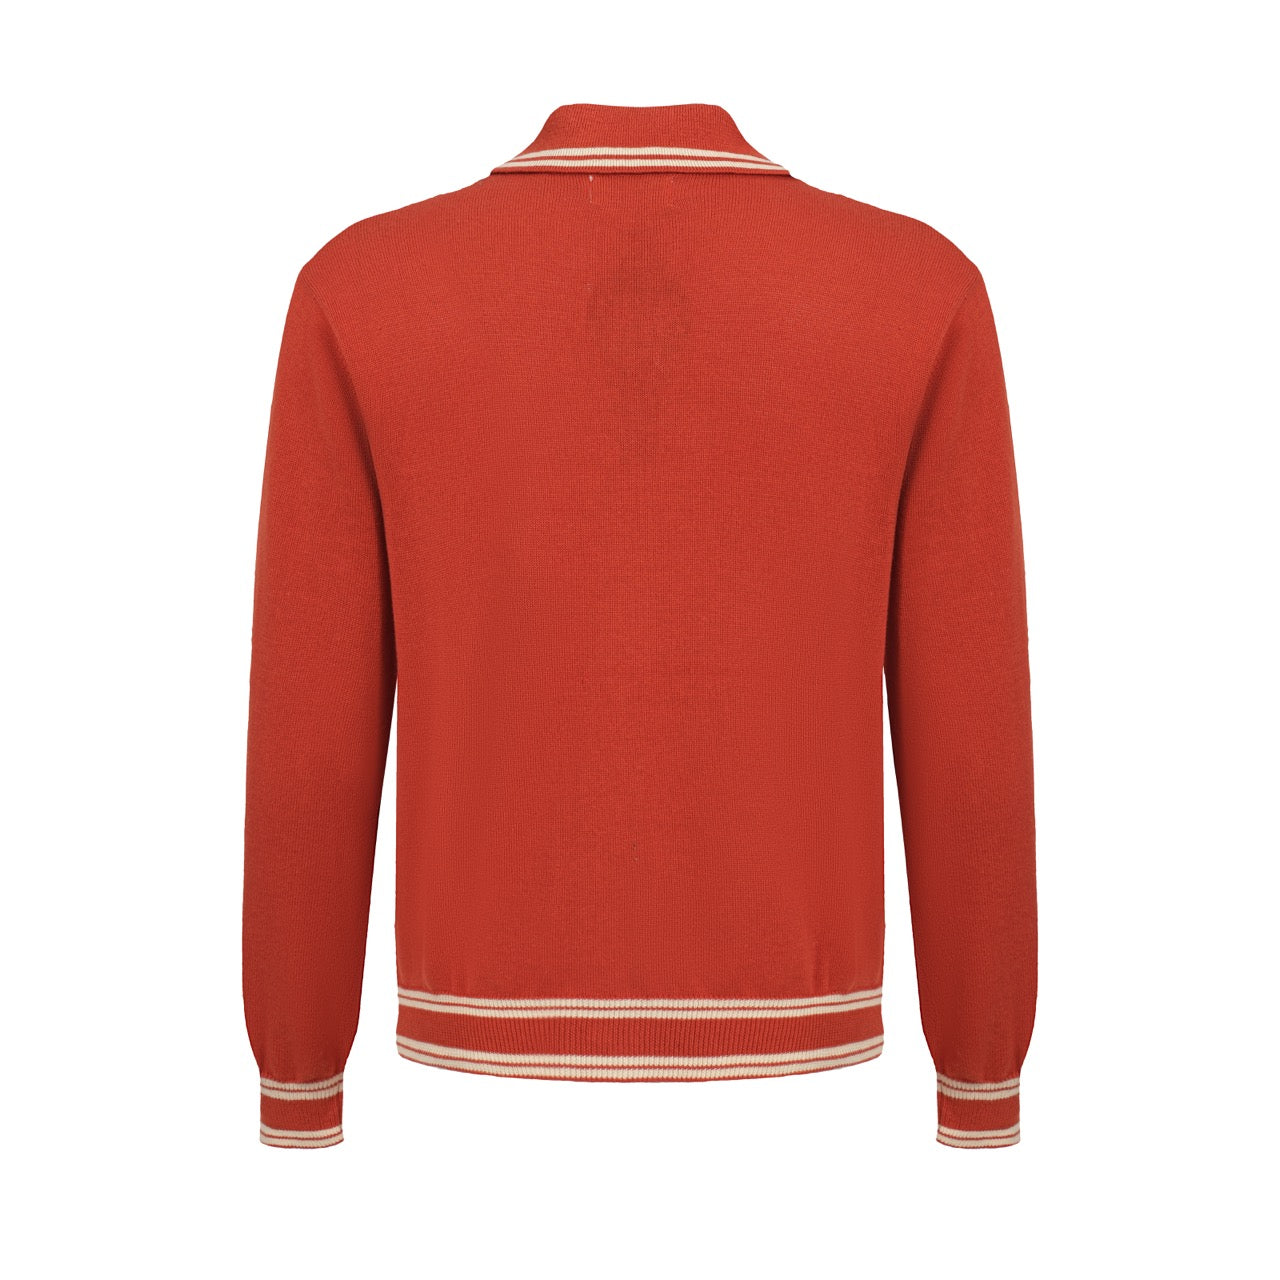 Men's Orange Knitted Long Sleeves Polo With Apricot Lines